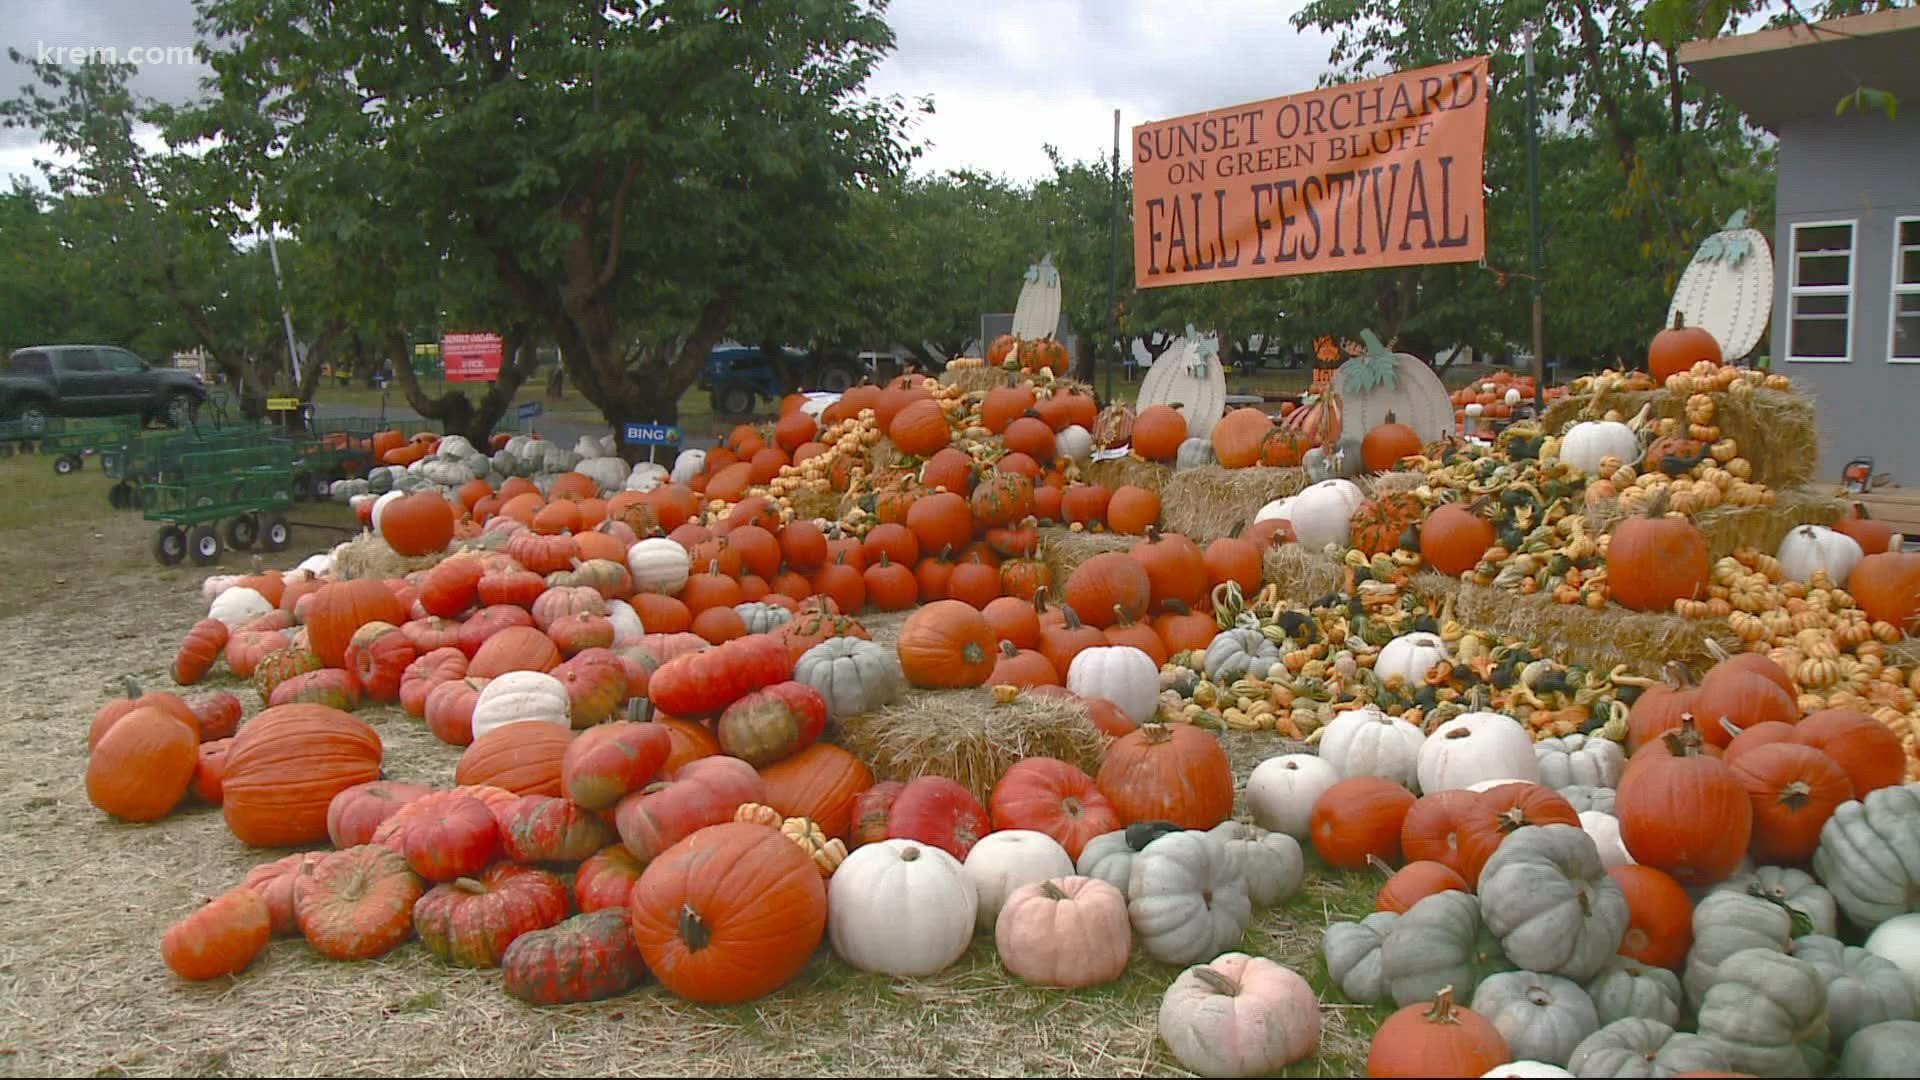 The Fall Harvest Festival runs from Sept. 25 through Oct. 31 on weekends at different times, and reservations in advance are required this year.